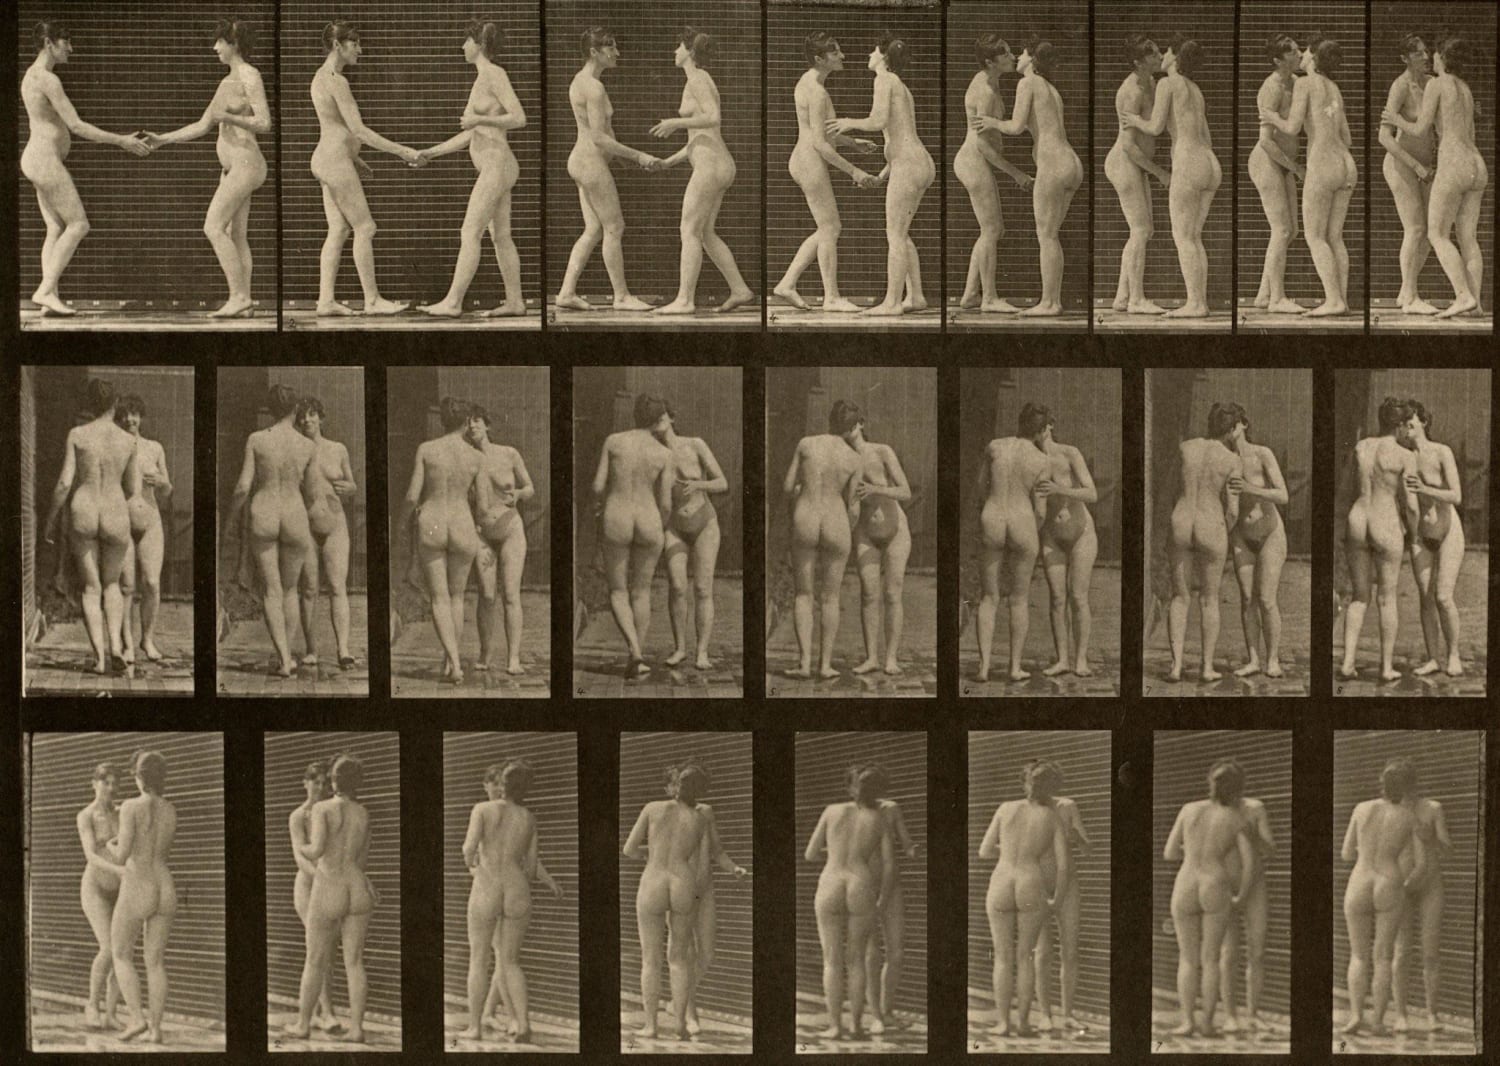 Plate 444 from Eadweard Muybridge's Animal Locomotion photographs (1872-1885), showing two nude women kissing. The Muybridge Online Archive believes this plate represents "the first time that a kiss was documented over time through photography... the first kiss ever filmed."